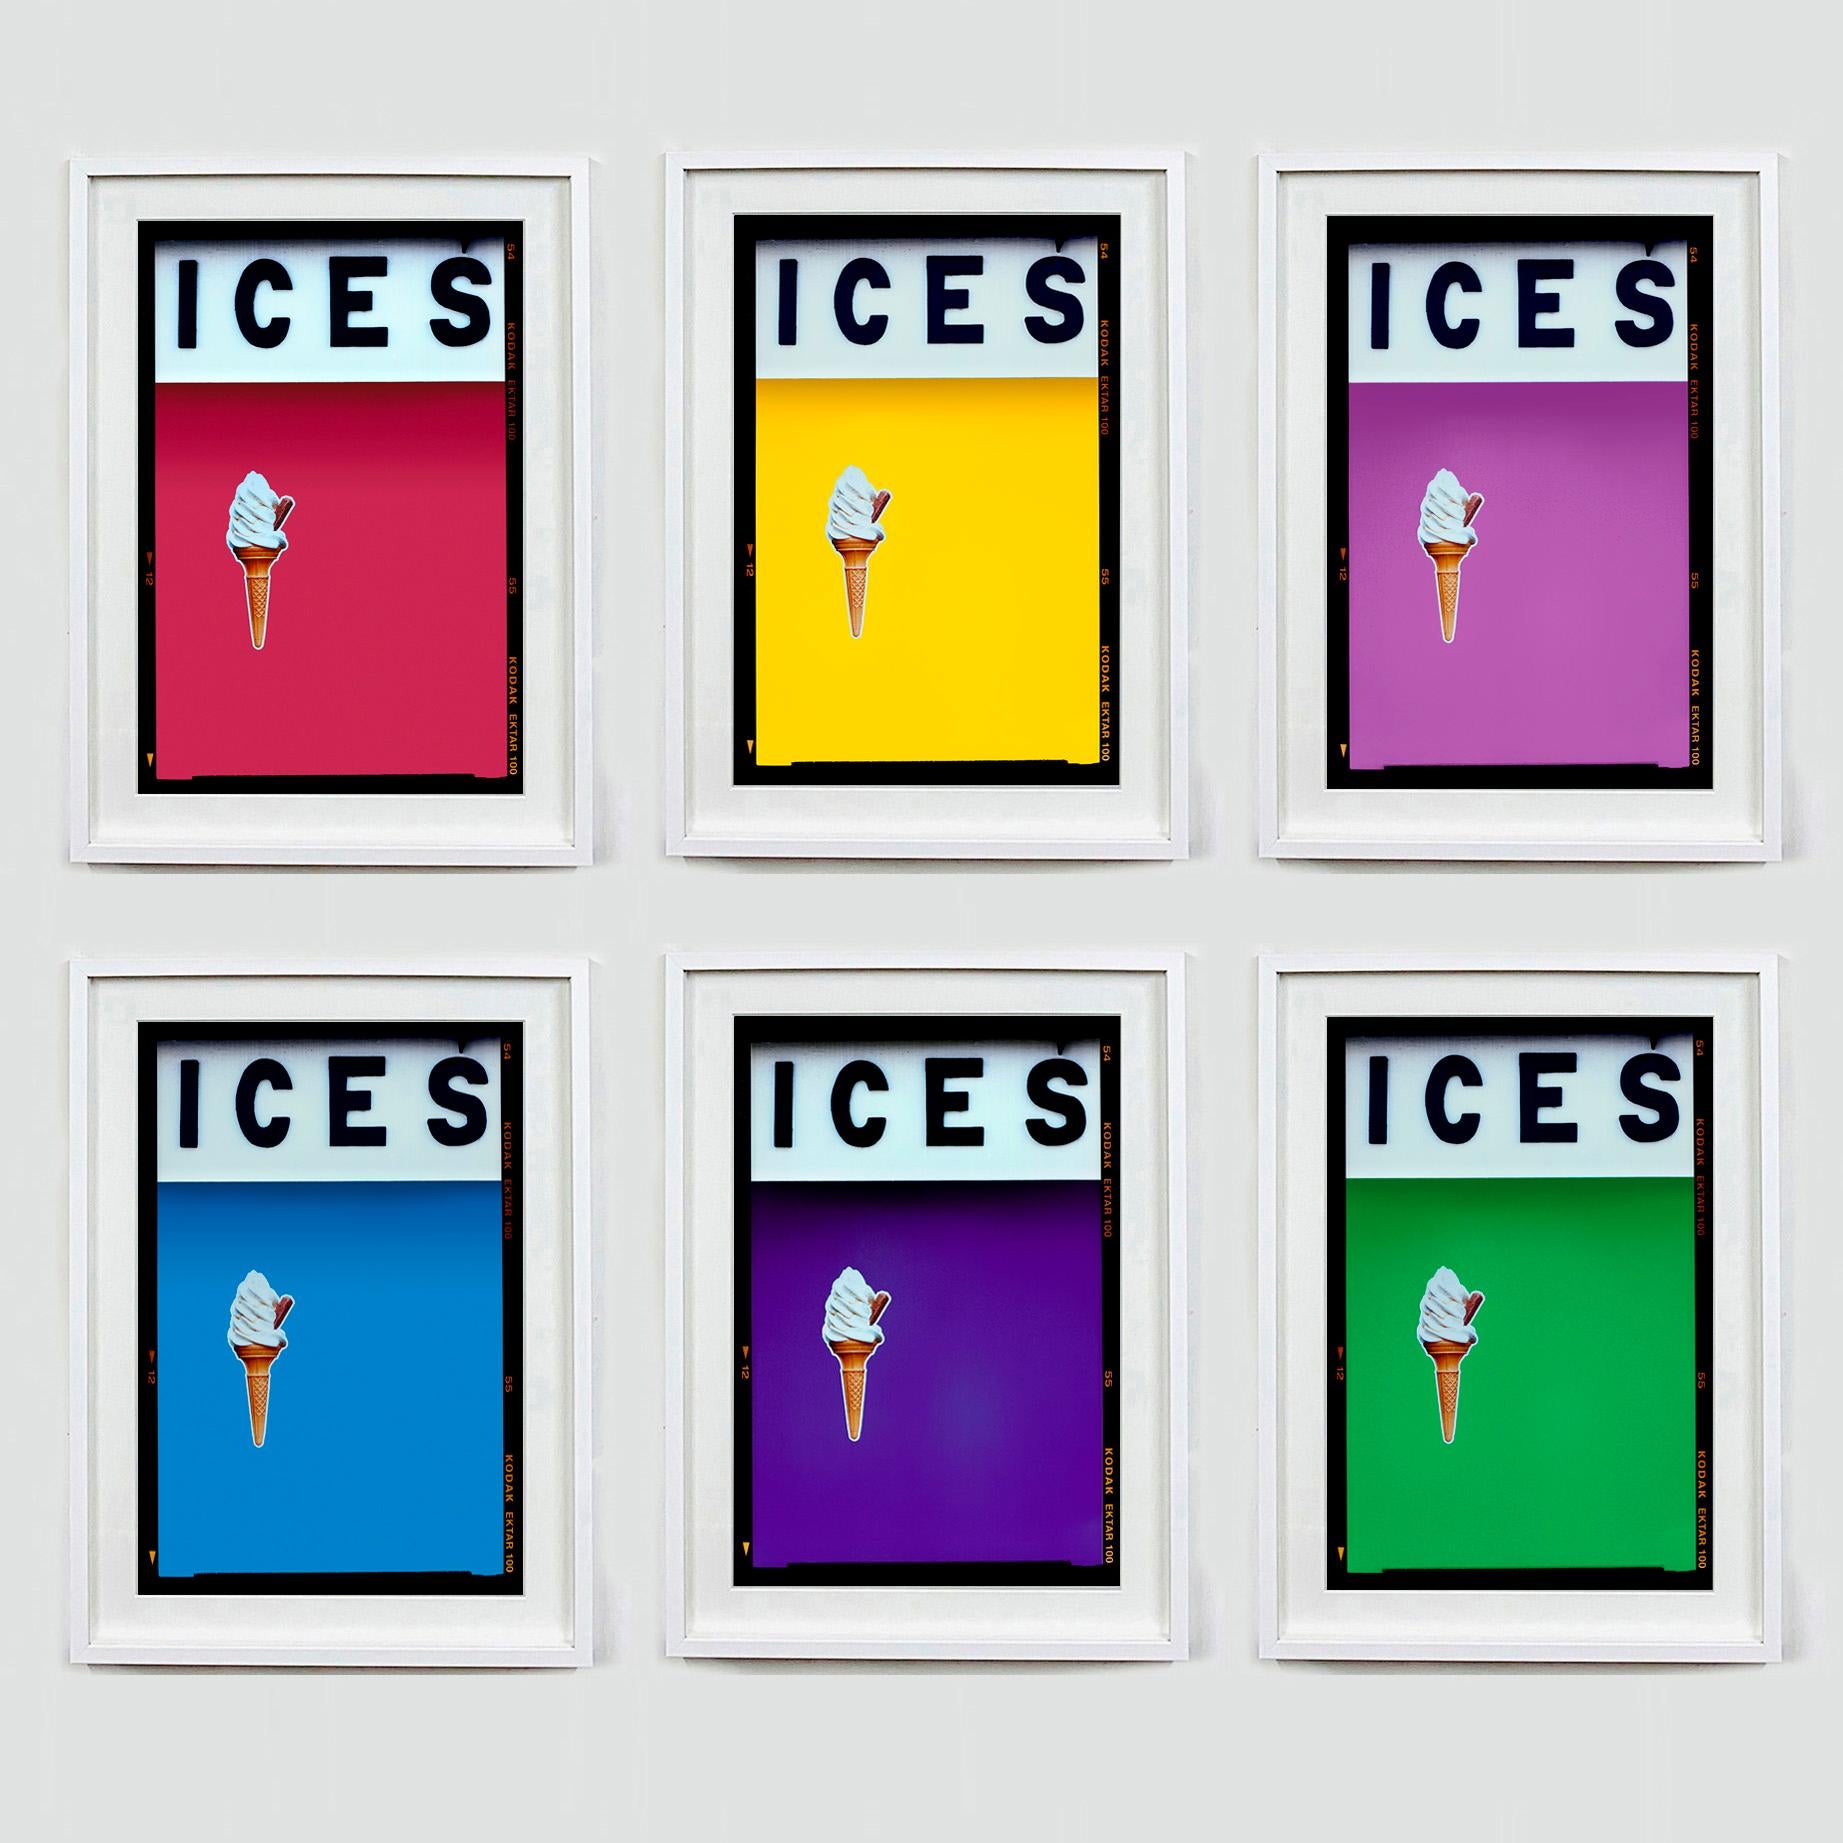 ICES - Six Framed Artworks, Photographs by Richard Heeps. Select your color pairing.

ICES, by Richard Heeps, photographed at the British Seaside at the end of summer 2020. This artwork is about evoking memories of the simple joy of days by the